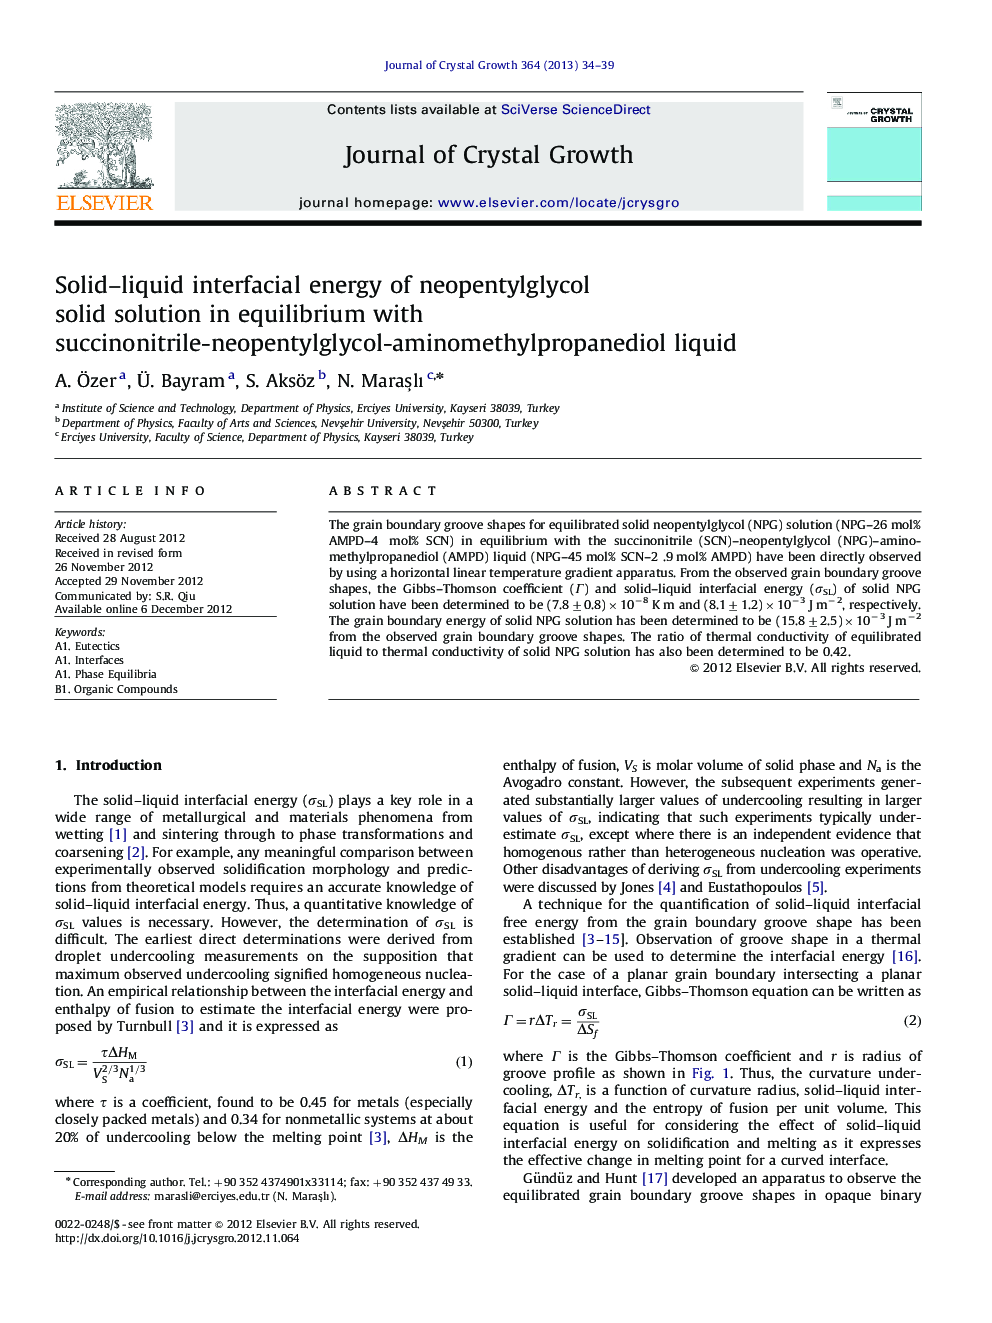 Solid–liquid interfacial energy of neopentylglycol solid solution in equilibrium with succinonitrile-neopentylglycol-aminomethylpropanediol liquid